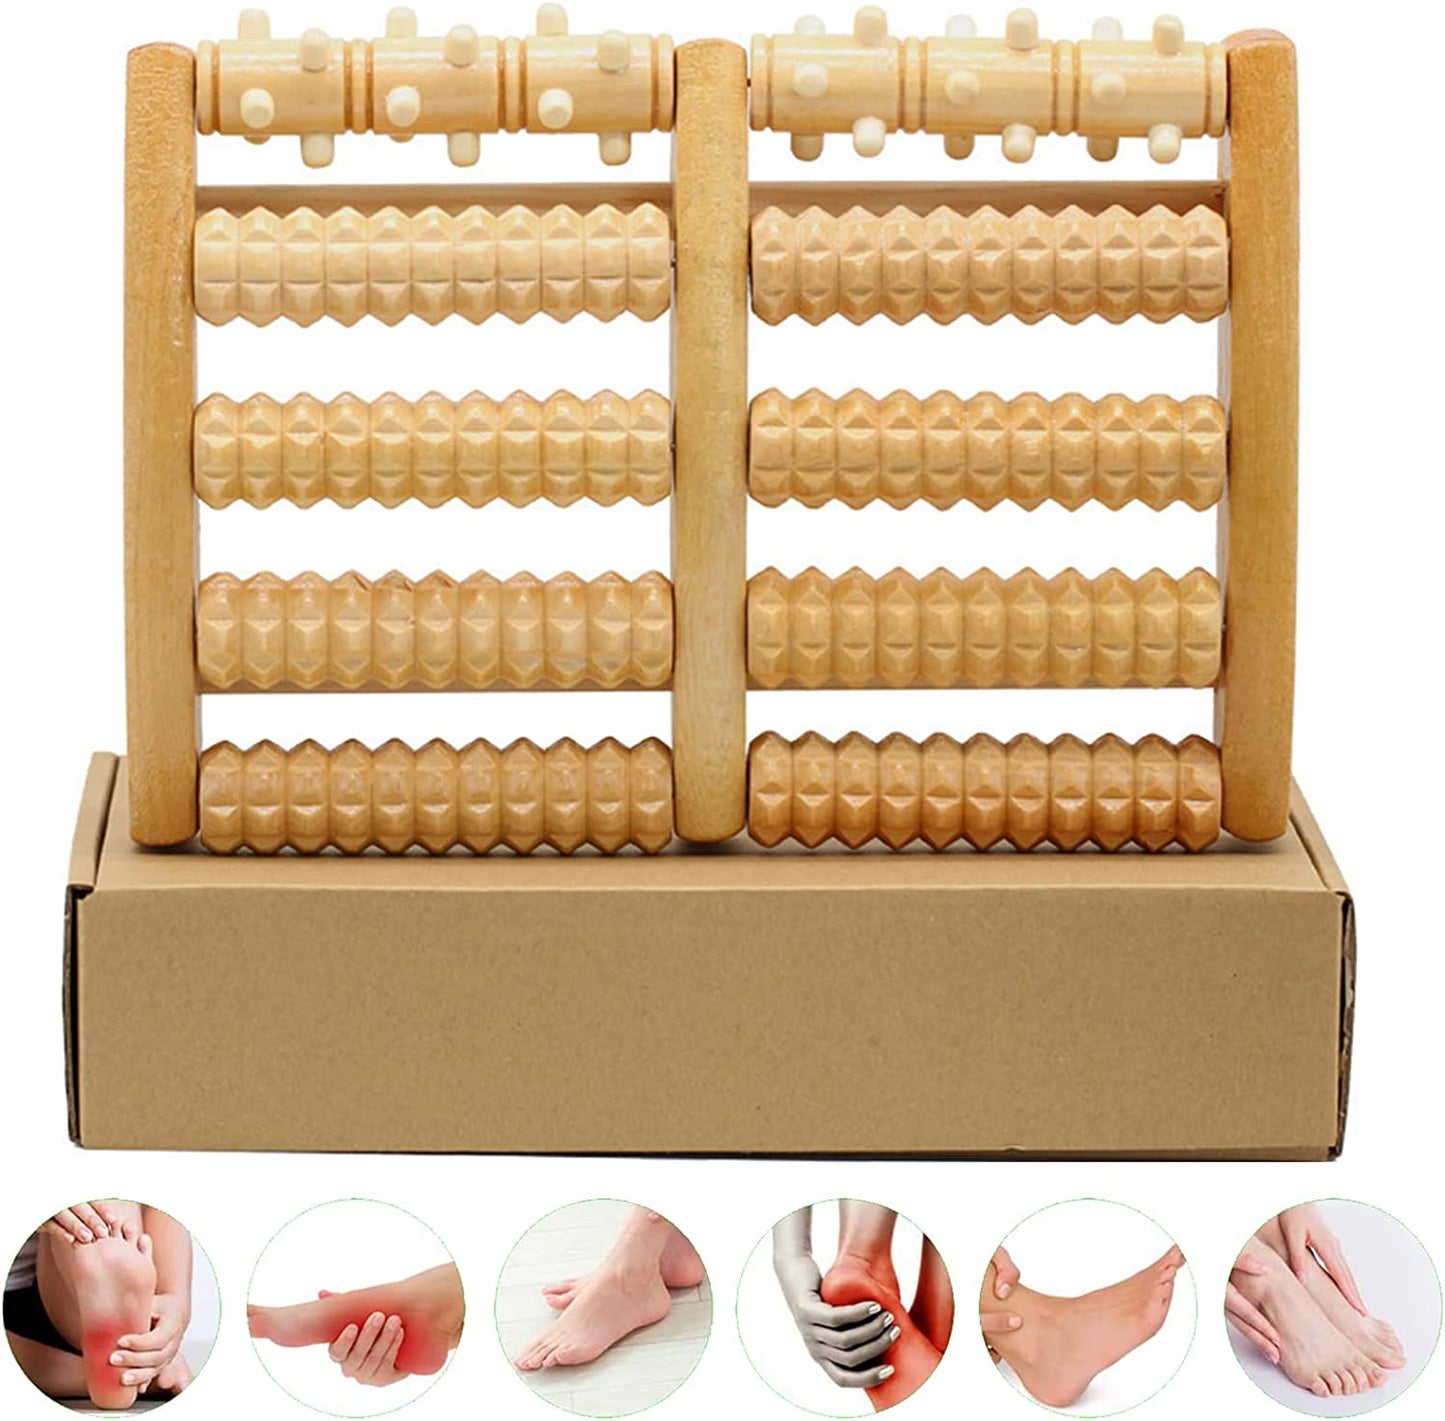 Foot Massager Roller - Plantar Fasciitis & Stress Relief, Heel, Arch, Muscle Aches, Foot Pain - Relaxation Gifts for Women, Men - Shiatsu Massage, Large Wooden Dual Feet Roller for Relax